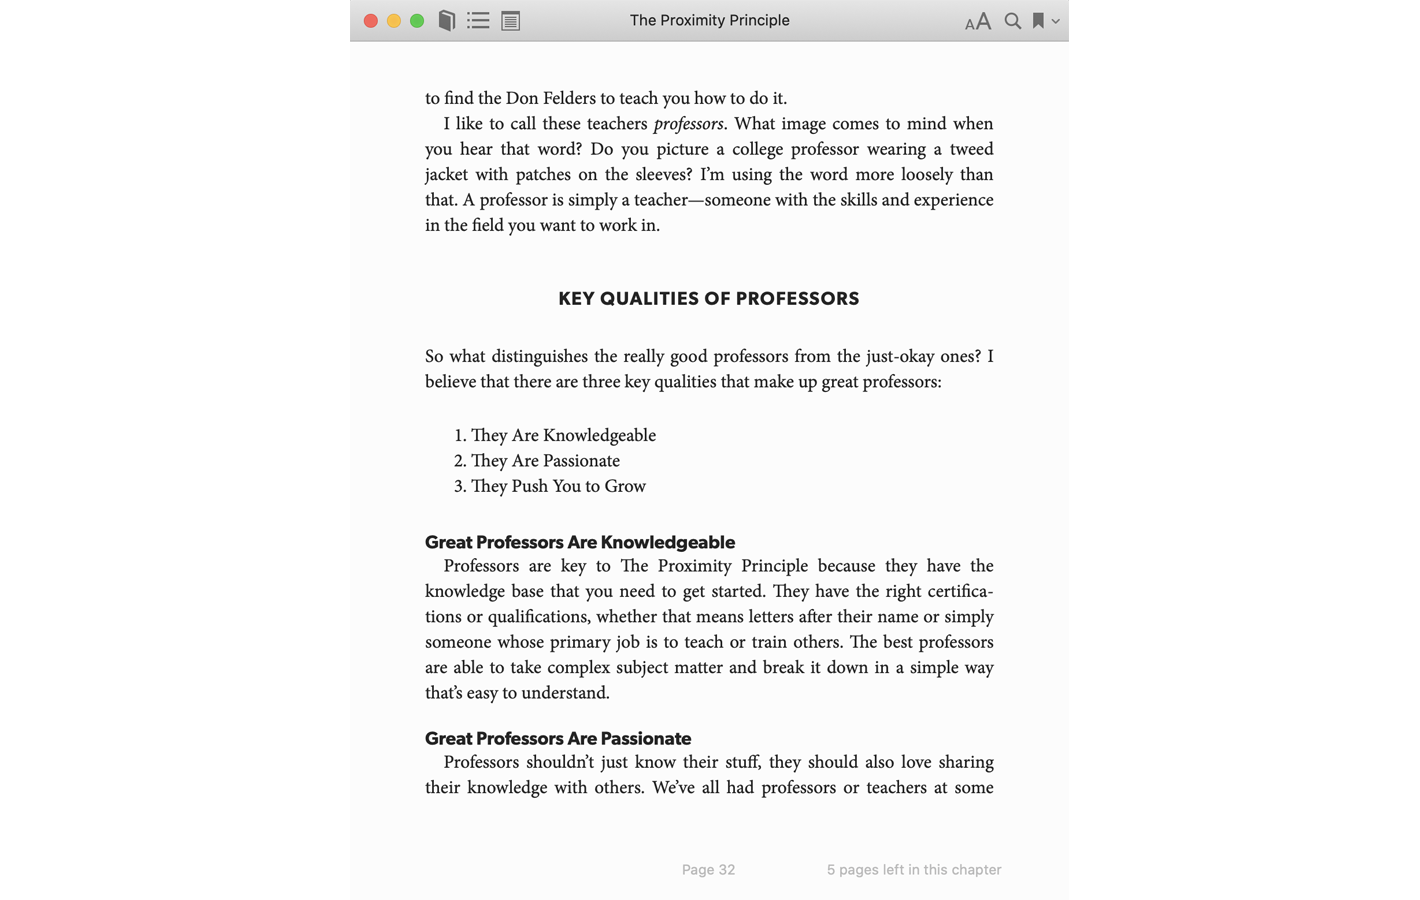 Page 32 for The Proximity Principle